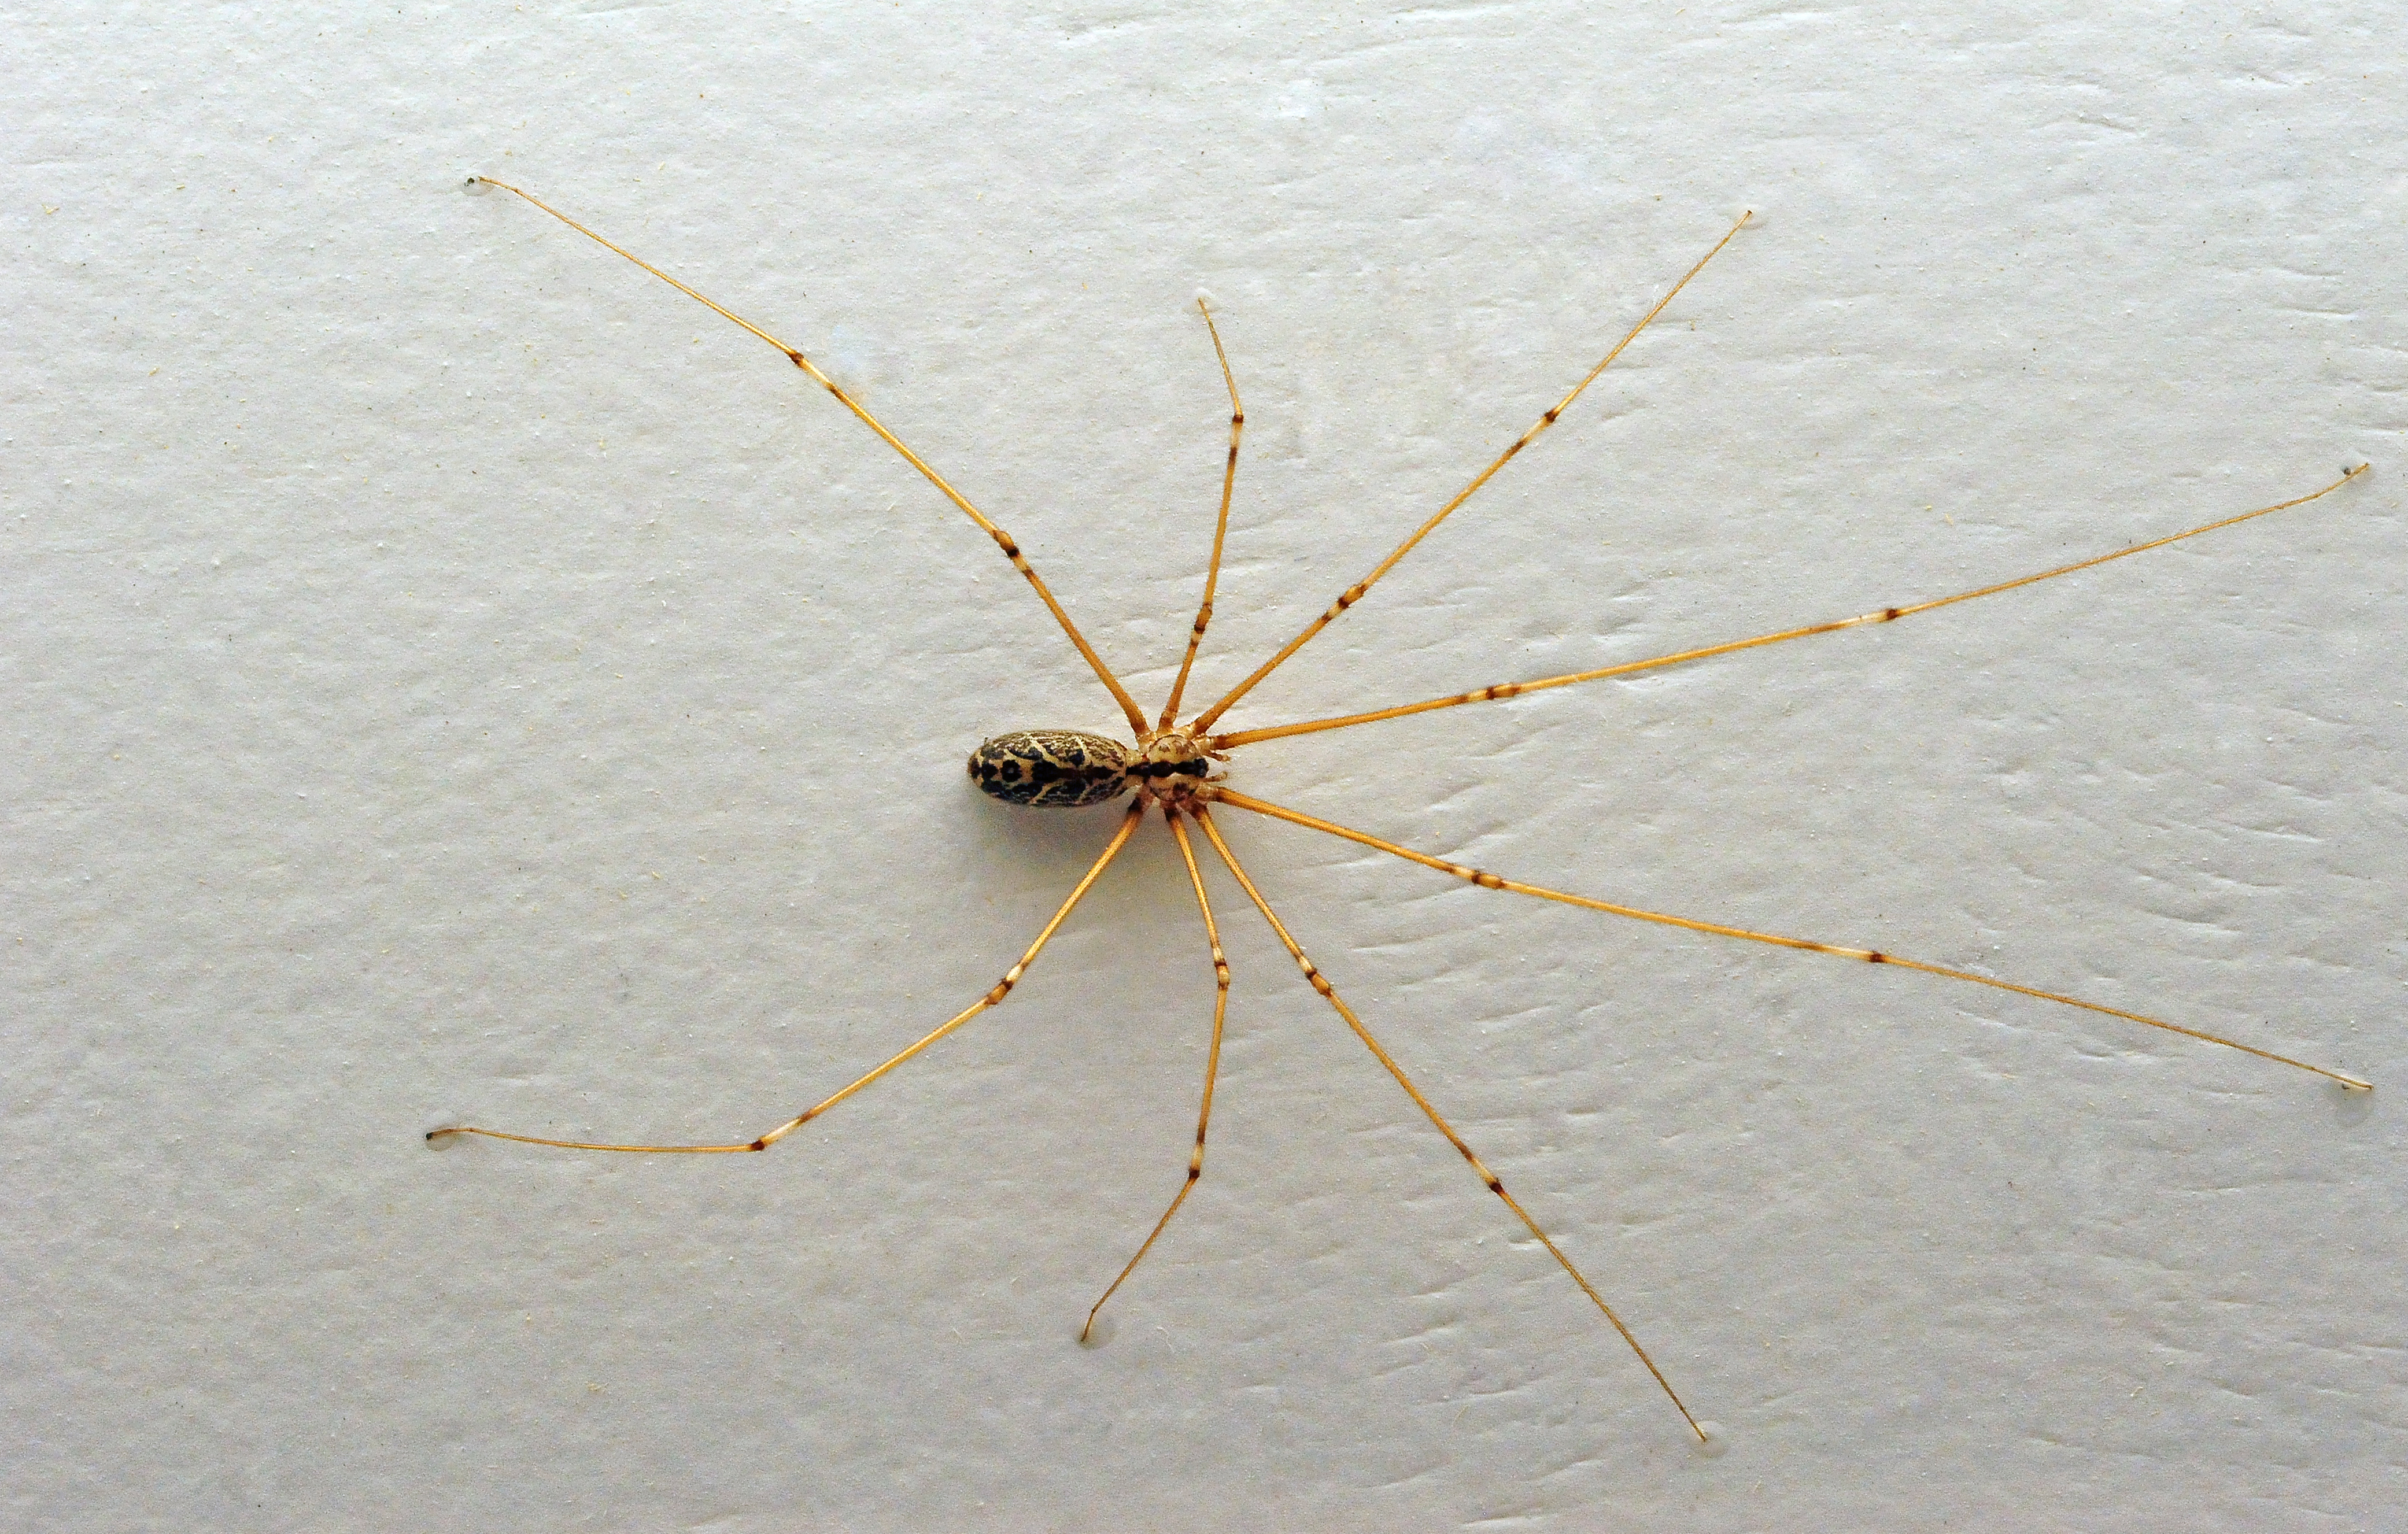 The Daddy-Long-Legs Spider